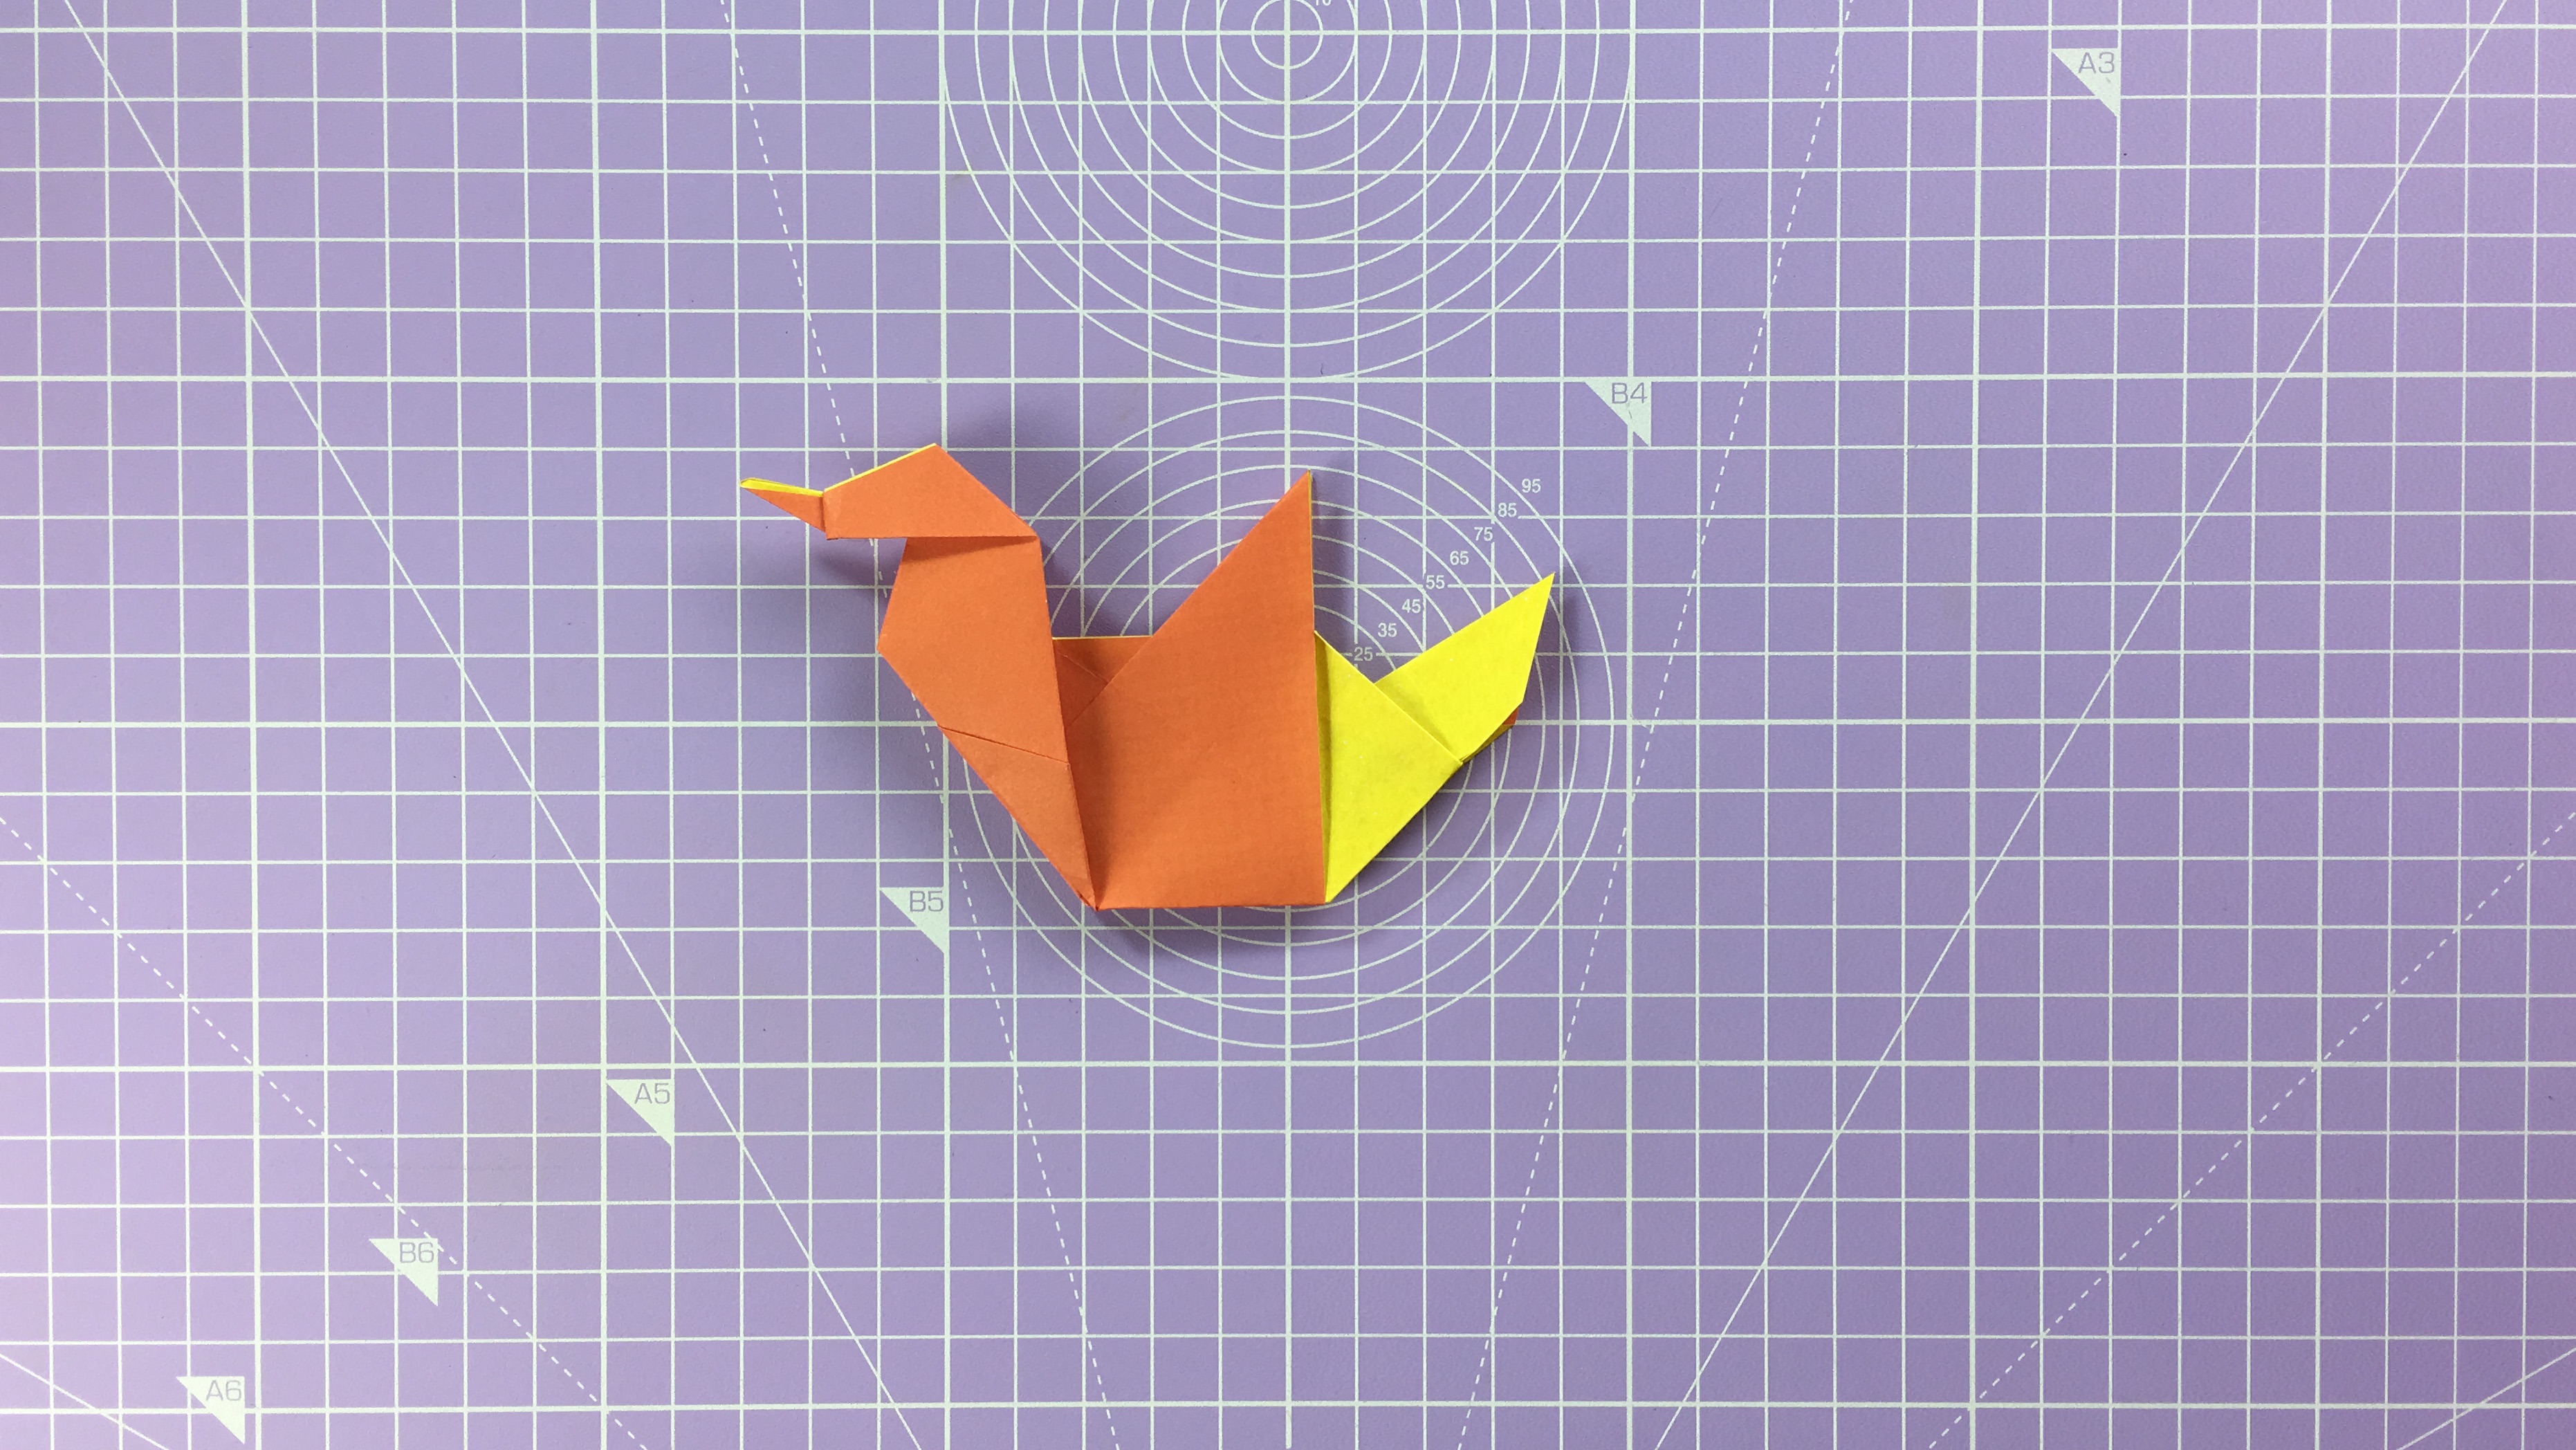 How to make an origami duck - step 21b